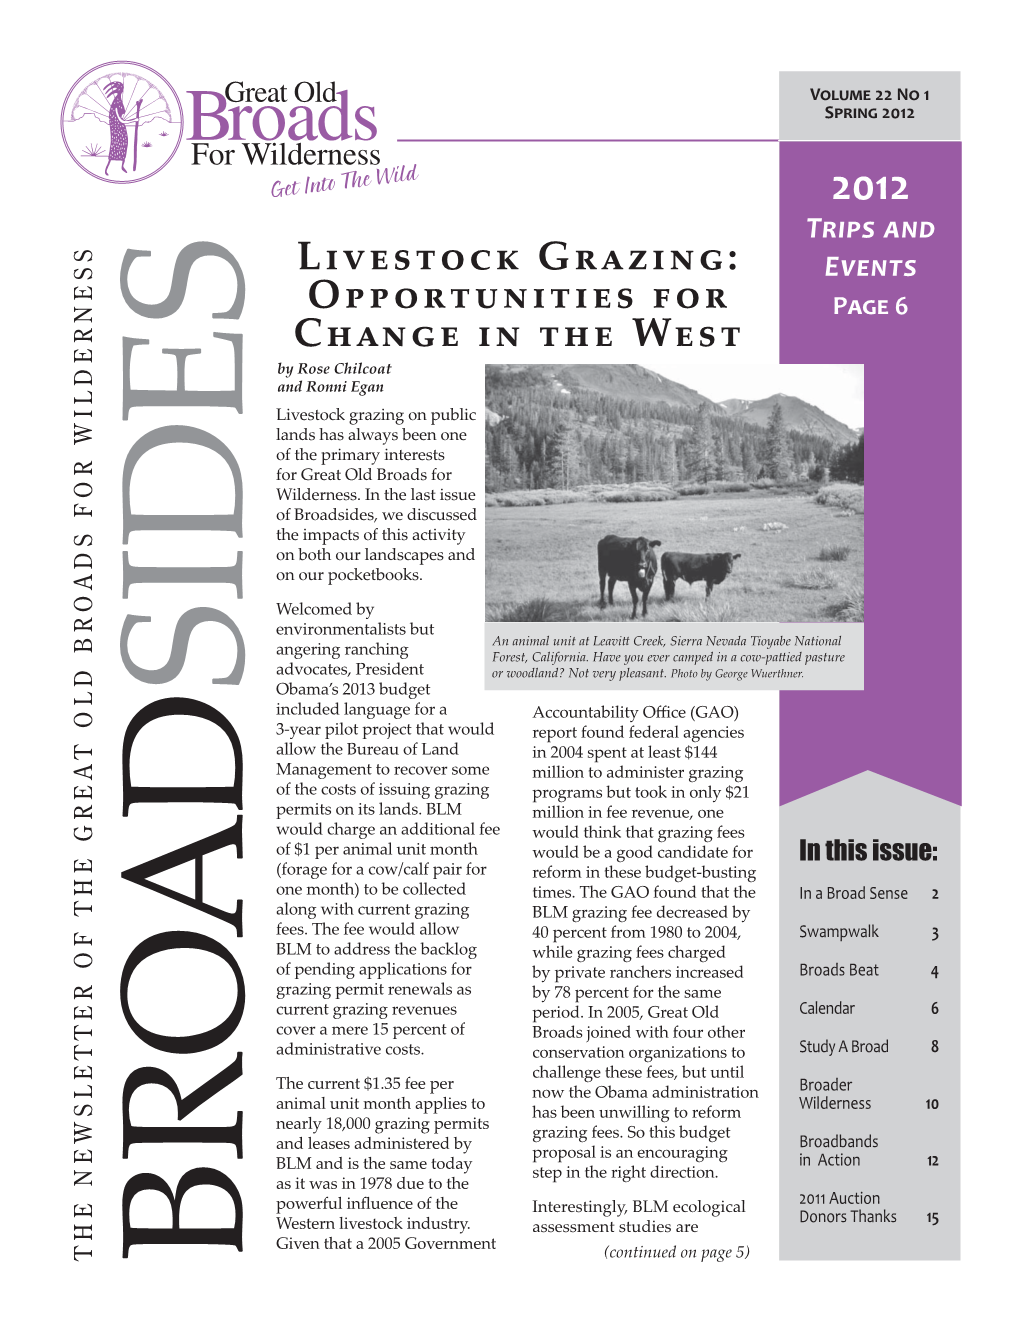 Livestock Grazing: Opportunities for Change in the West